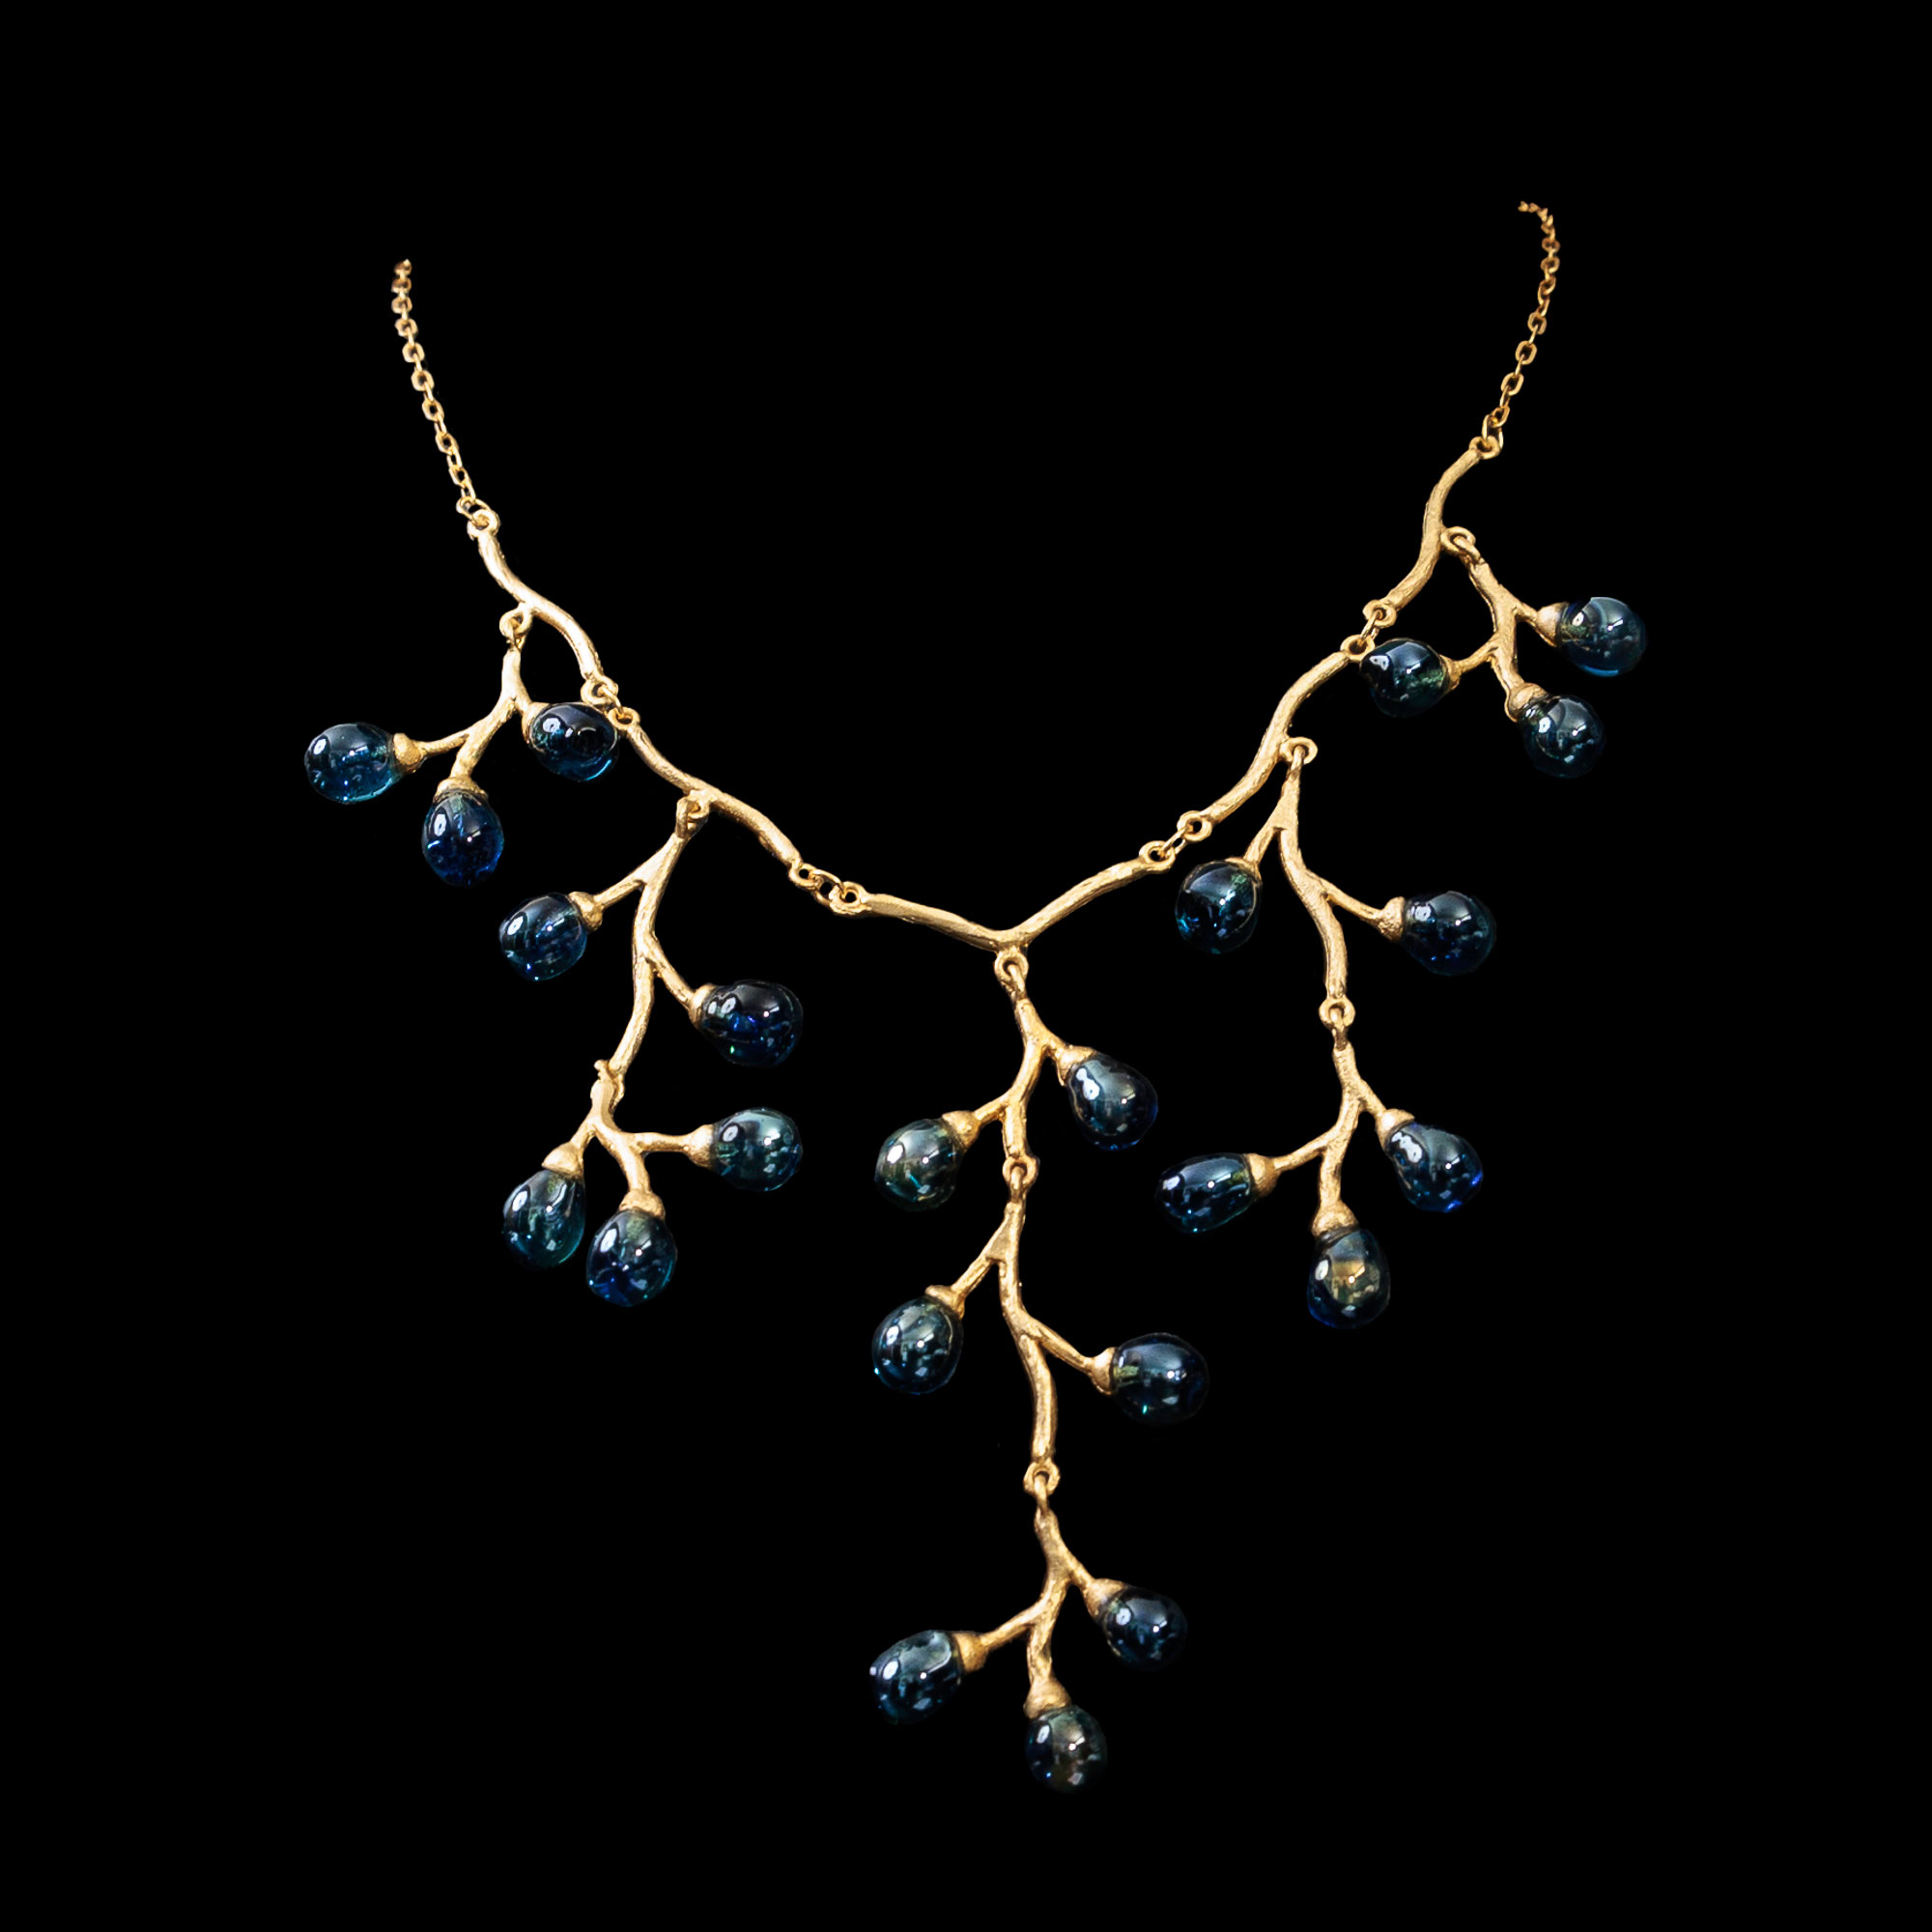 Louis C. Tiffany necklace : Willow Catkins, with golden chain